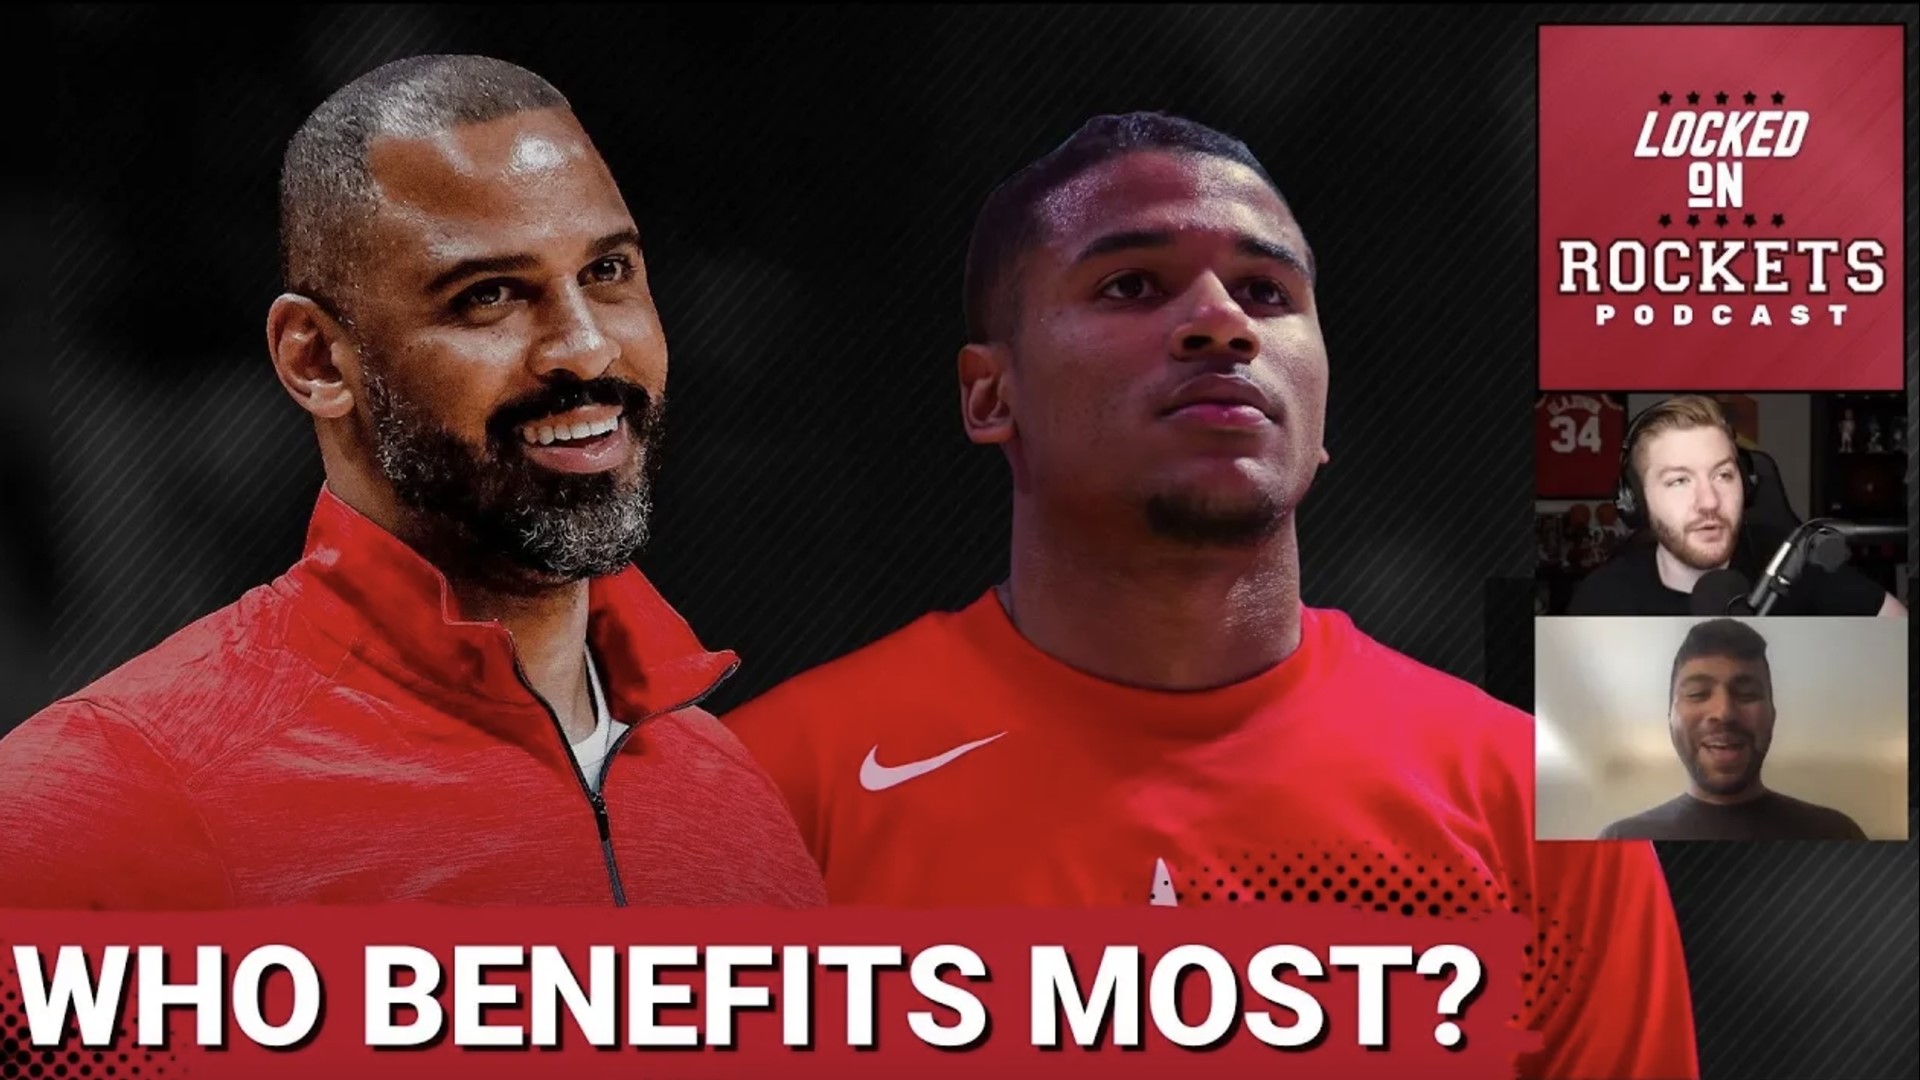 Host Jackson Gatlin (@JTGatlin) is joined by weekly cohost Alykhan Bijani (@Rockets_Insider) to discuss early reactions, expectations and concerns about Ime Udoka